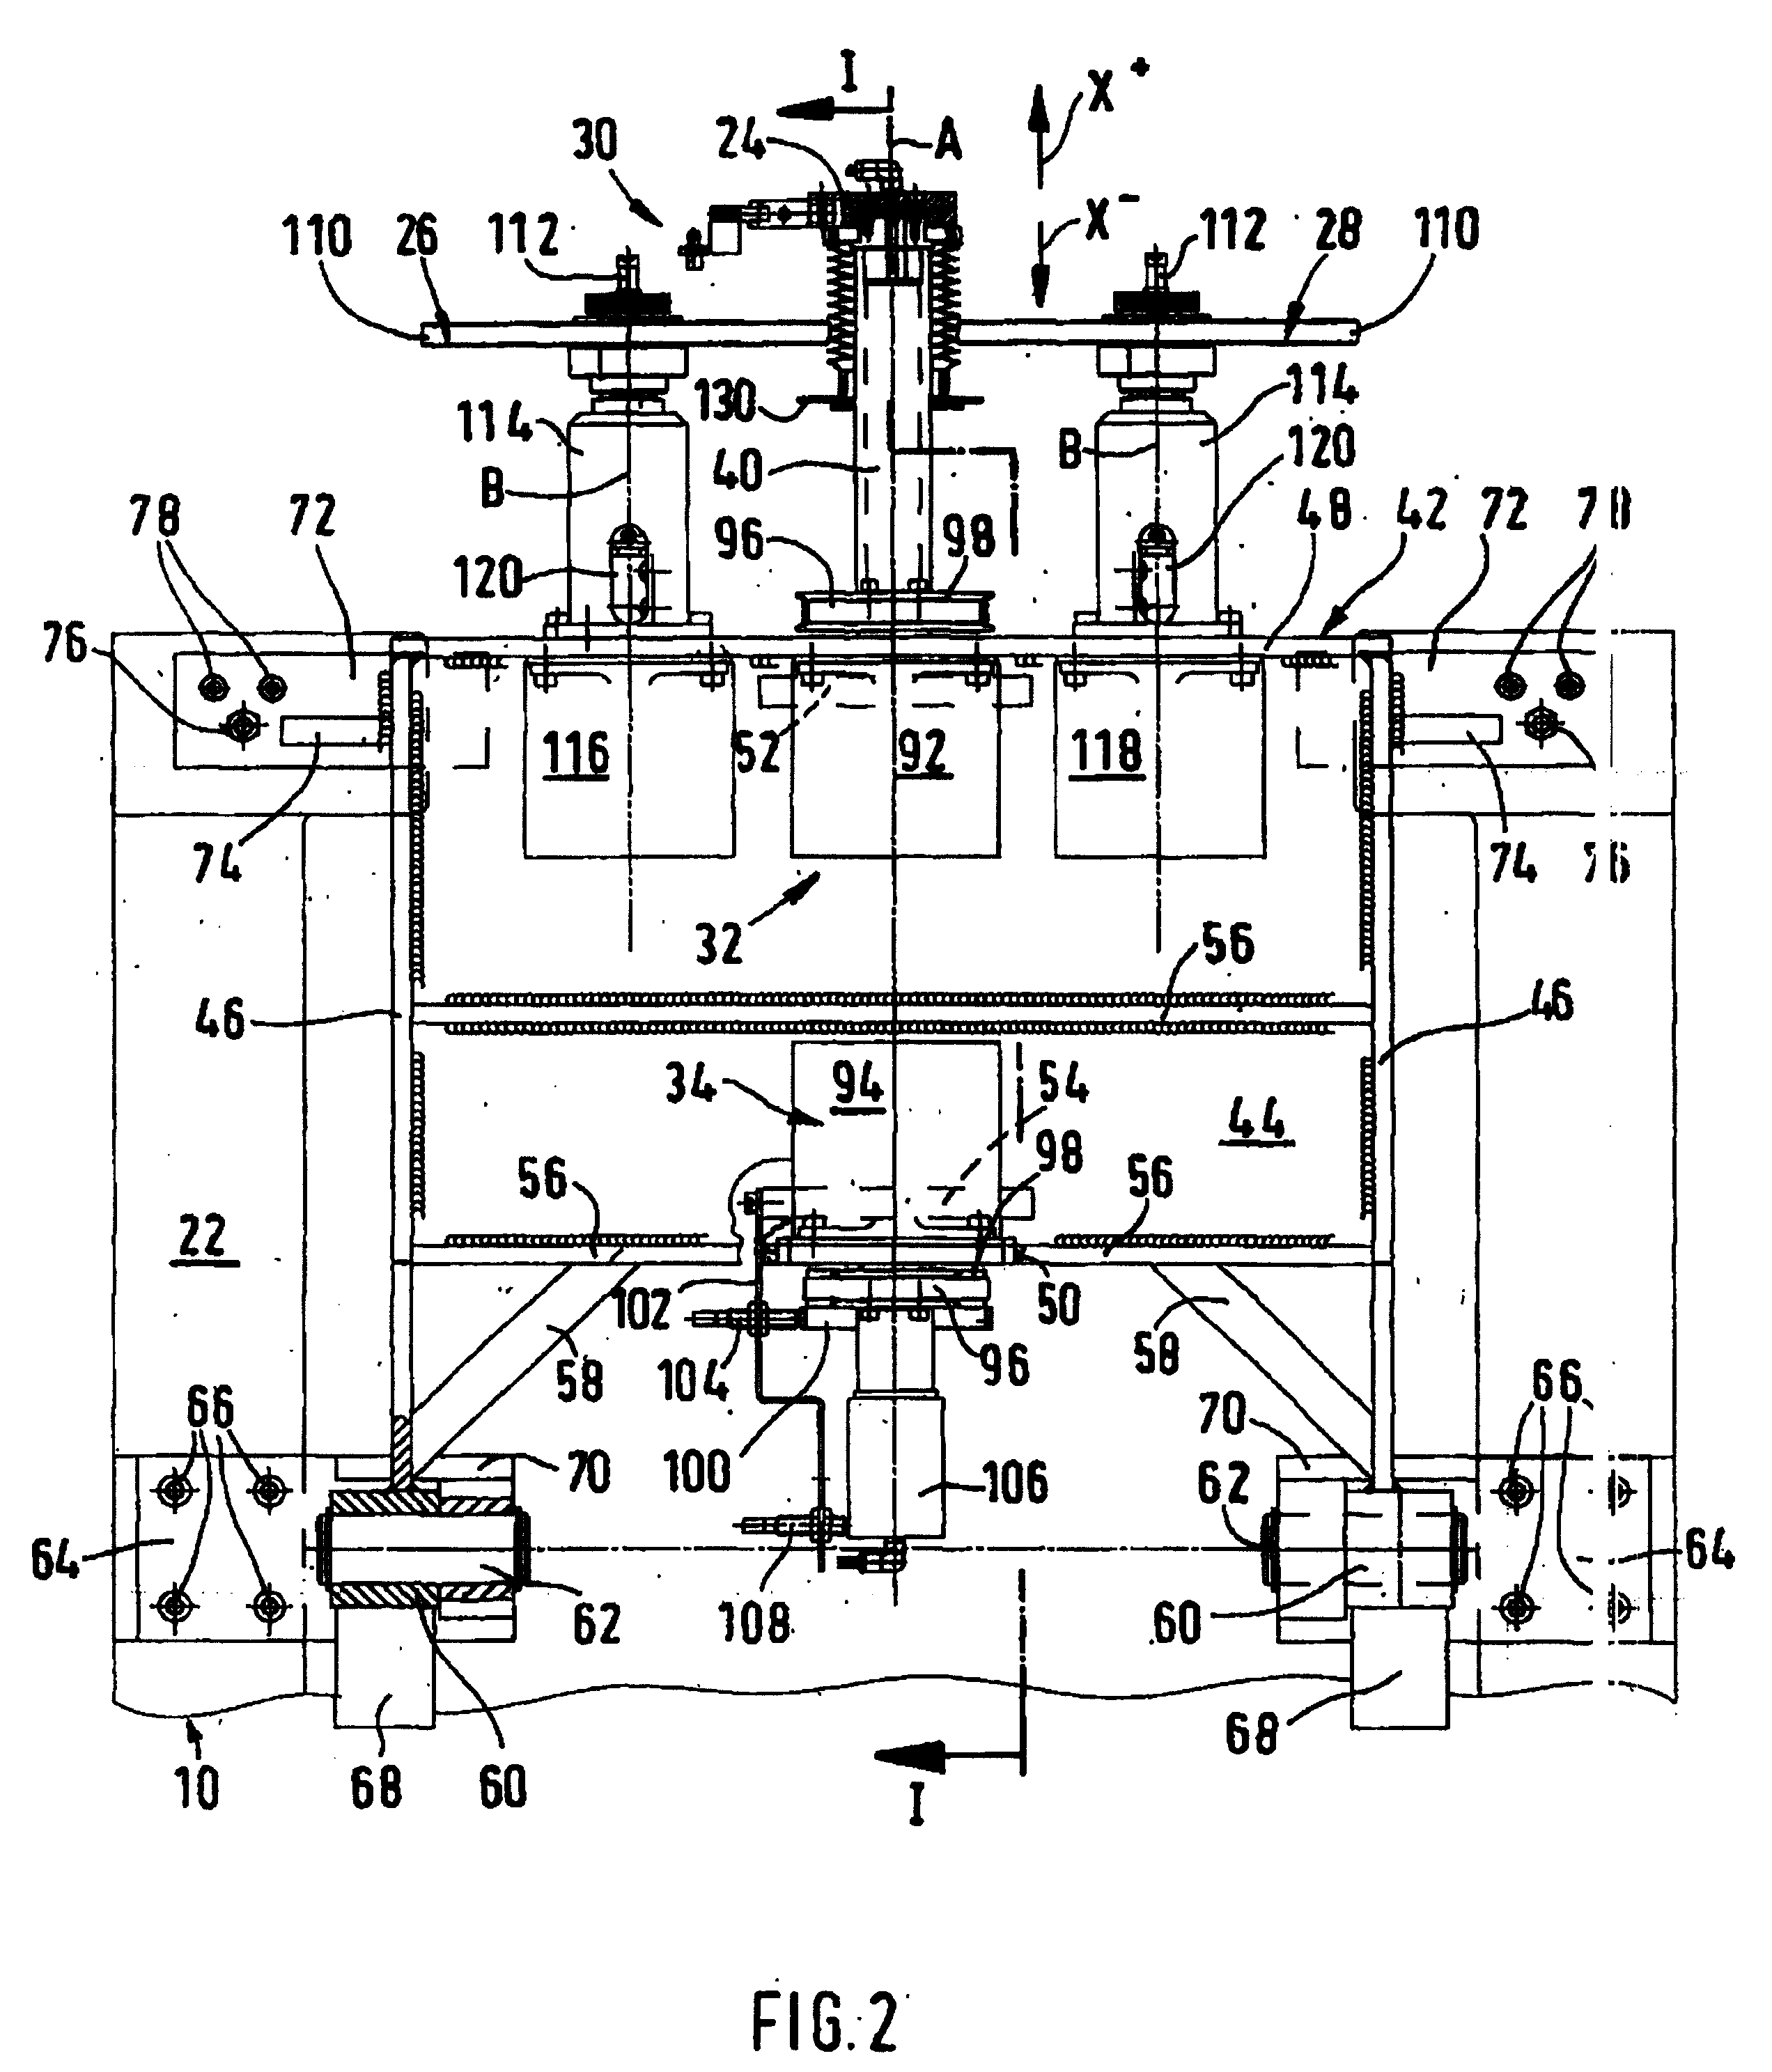 Device for loading and unloading optical workpieces